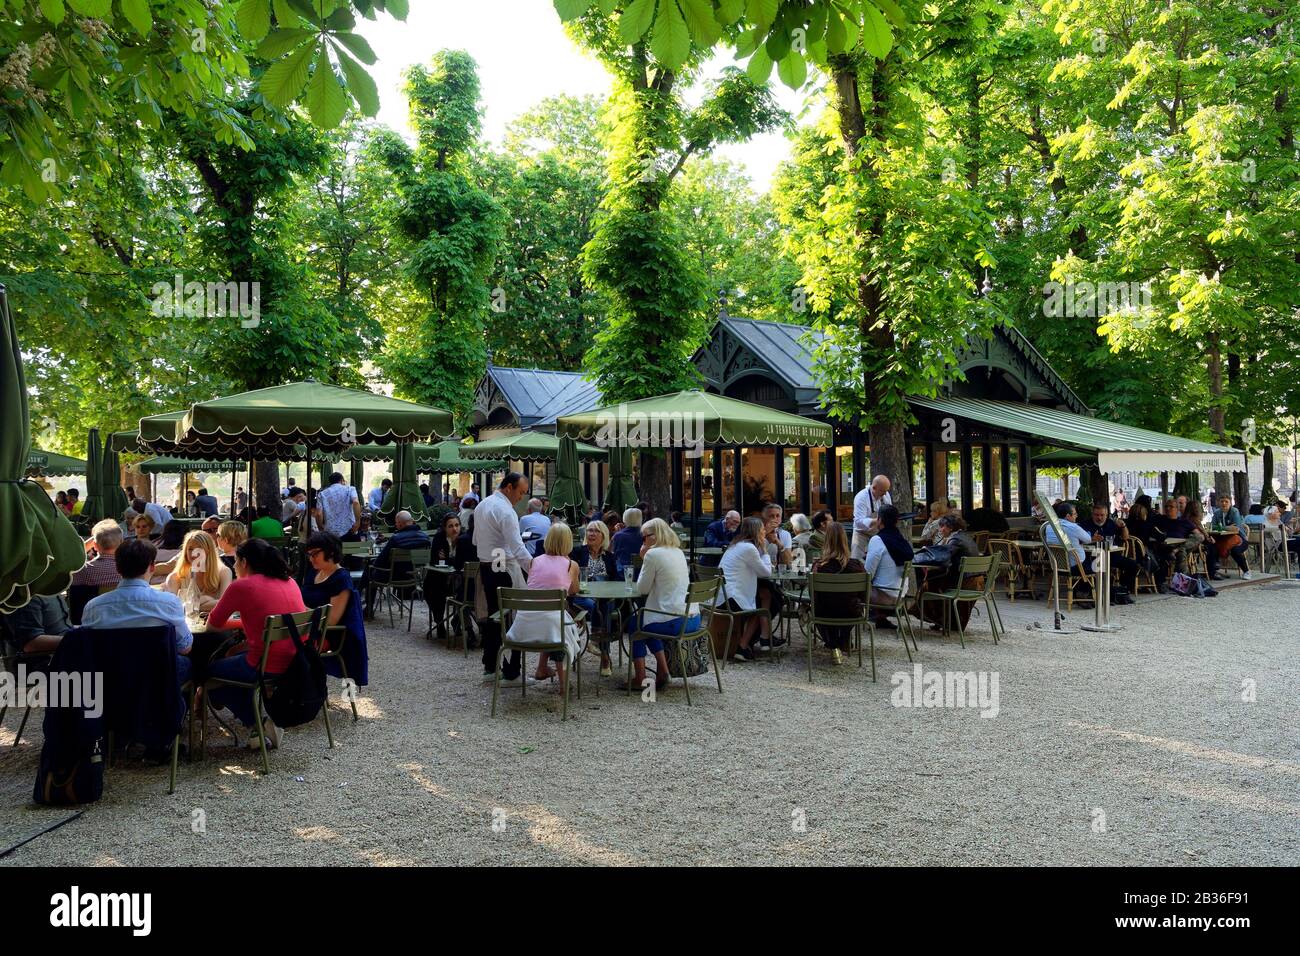 France, Paris, Odeon district, Luxembourg garden, La Terrrasse de Madame outside cafe in the Park Stock Photo